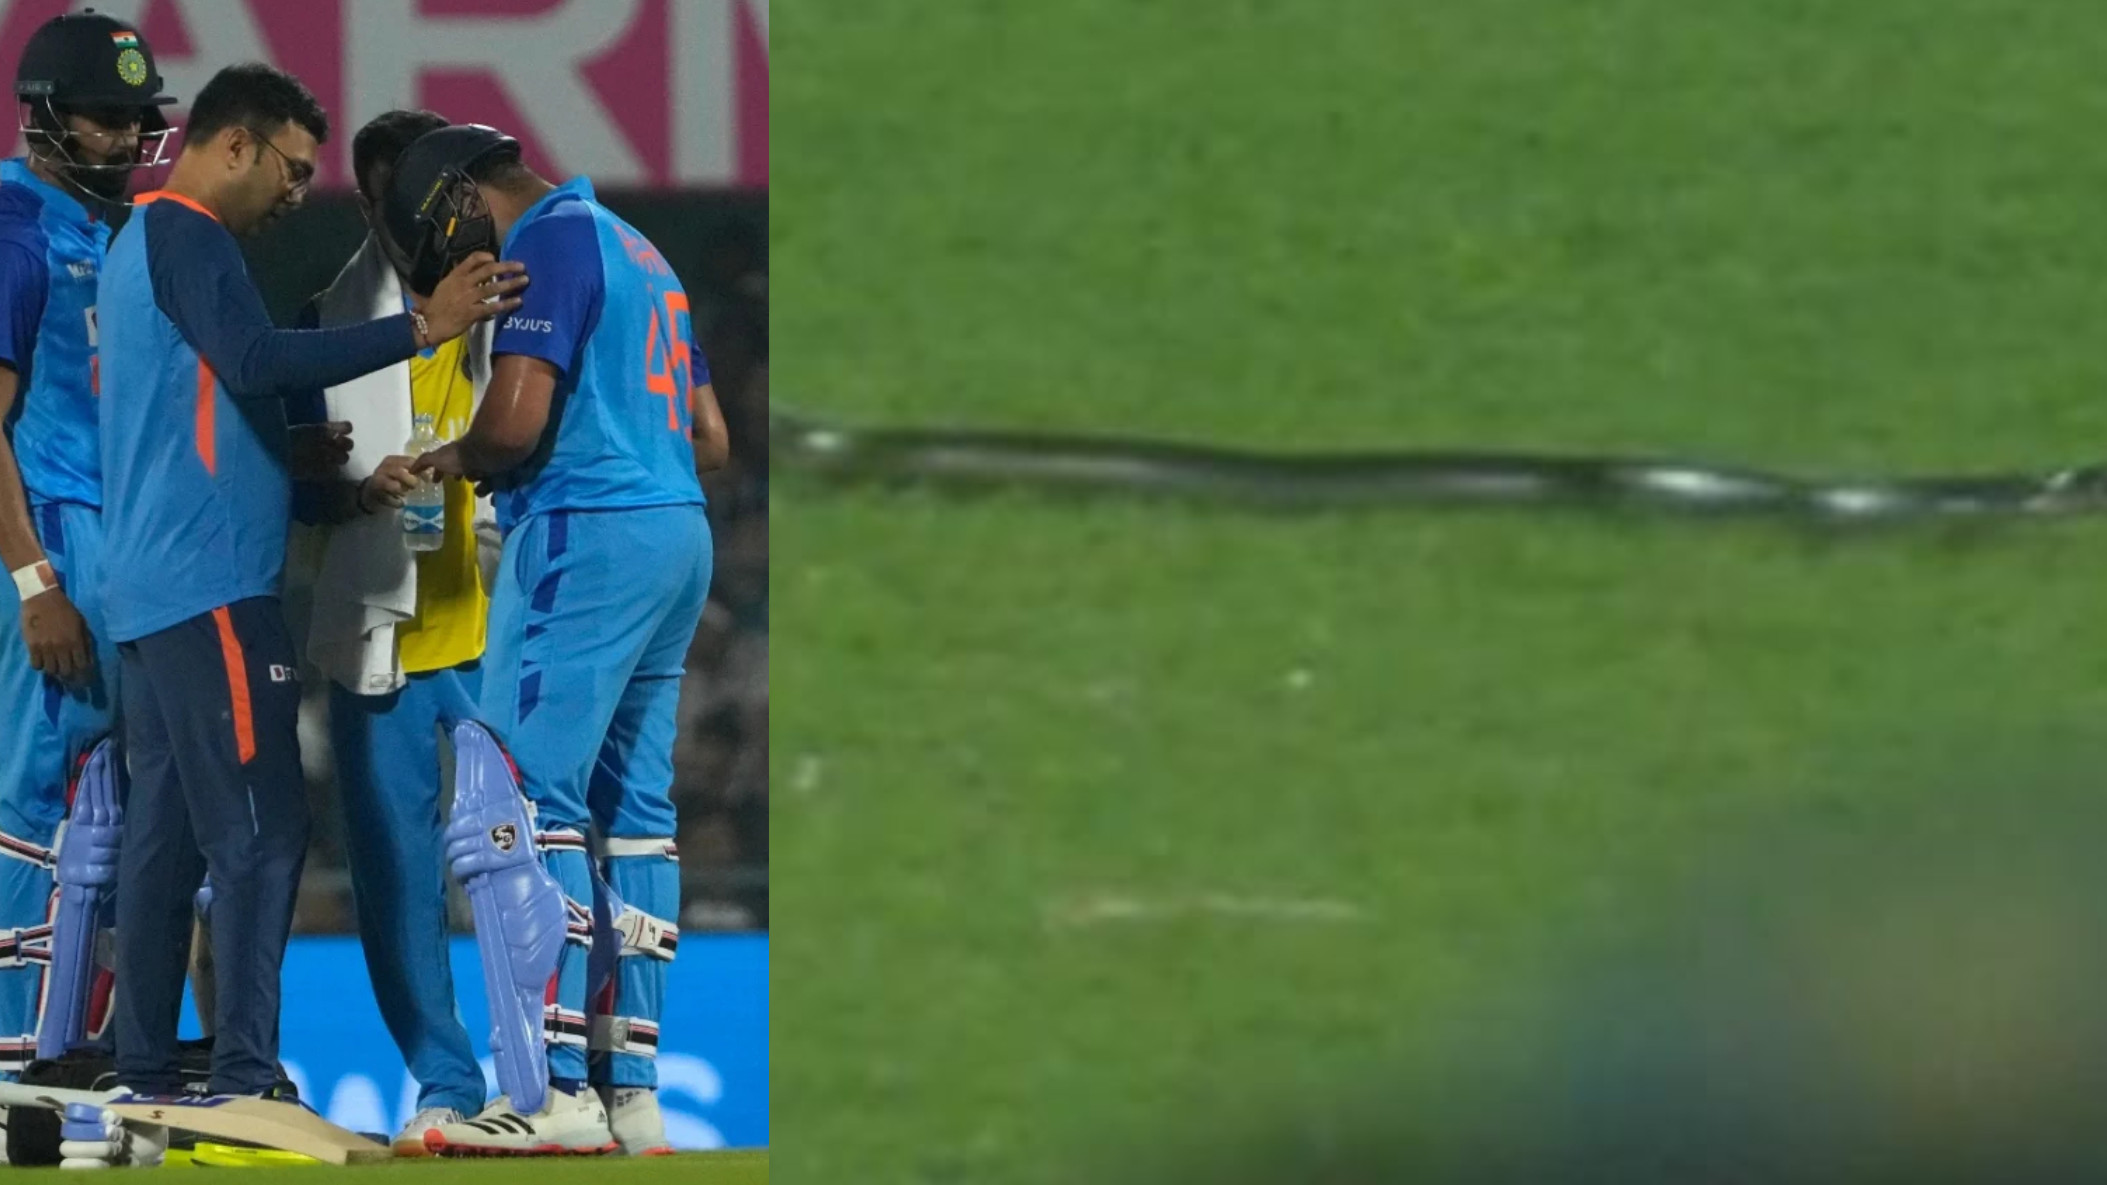 IND v SA 2022: WATCH- Snake invades Barsapara ground during 2nd T20I between India and South Africa